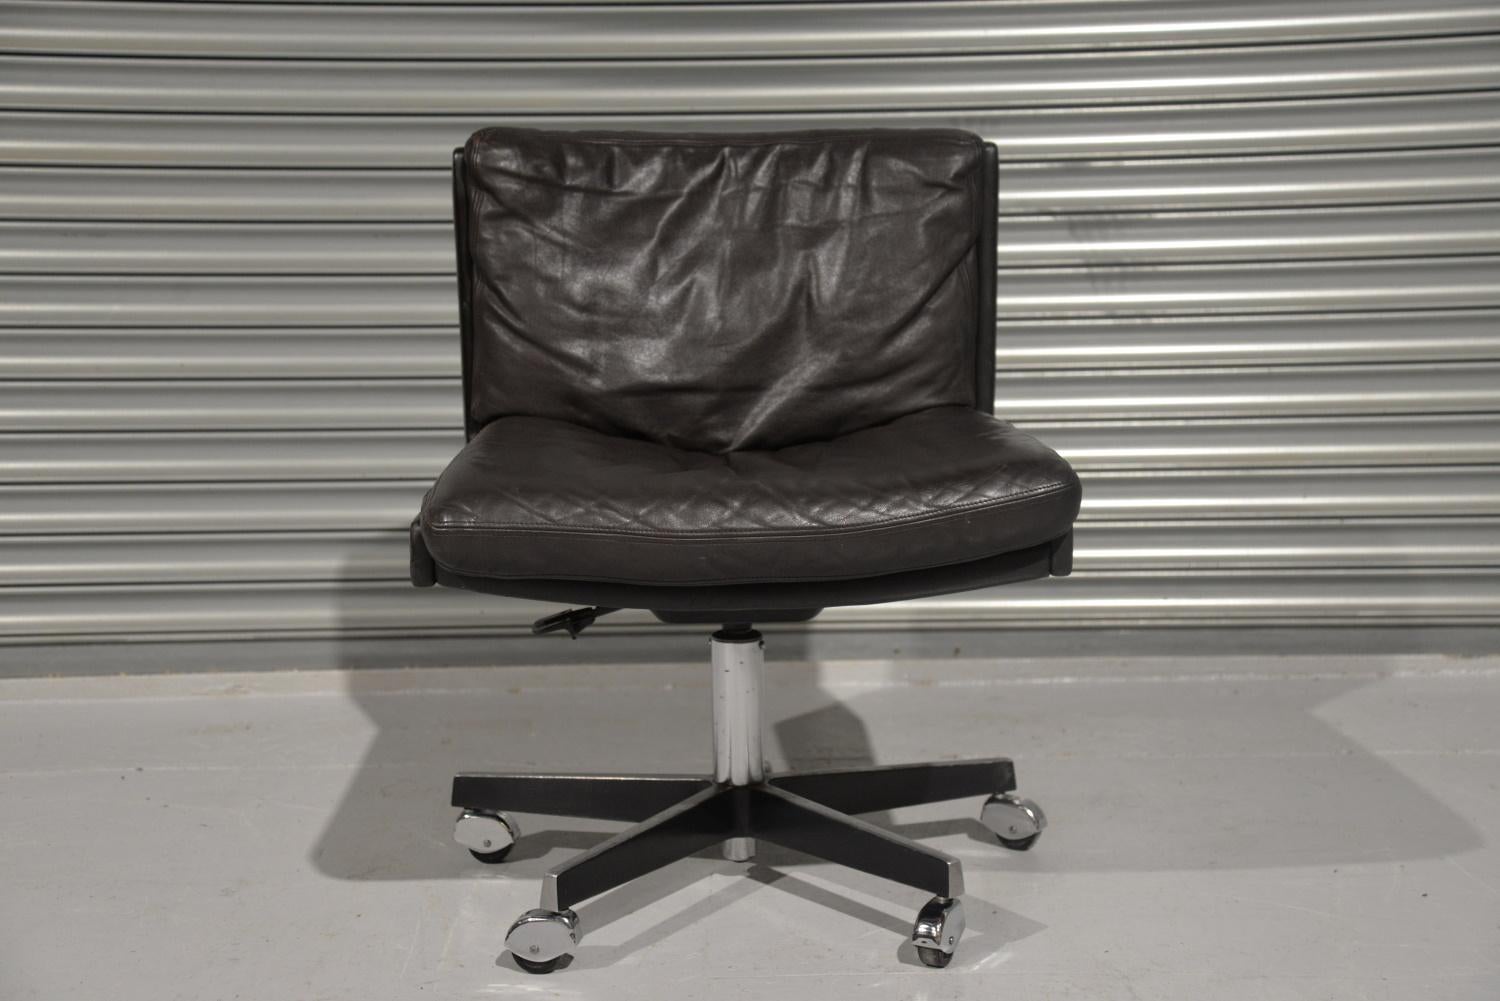 We are delighted to bring to you a highly desirable vintage Robert Haussmann swivel leather desk chair on castors for De Sede. Rarely available and built in the late 1950s by De Sede craftsman in Switzerland, this extremely comfortable armchair is